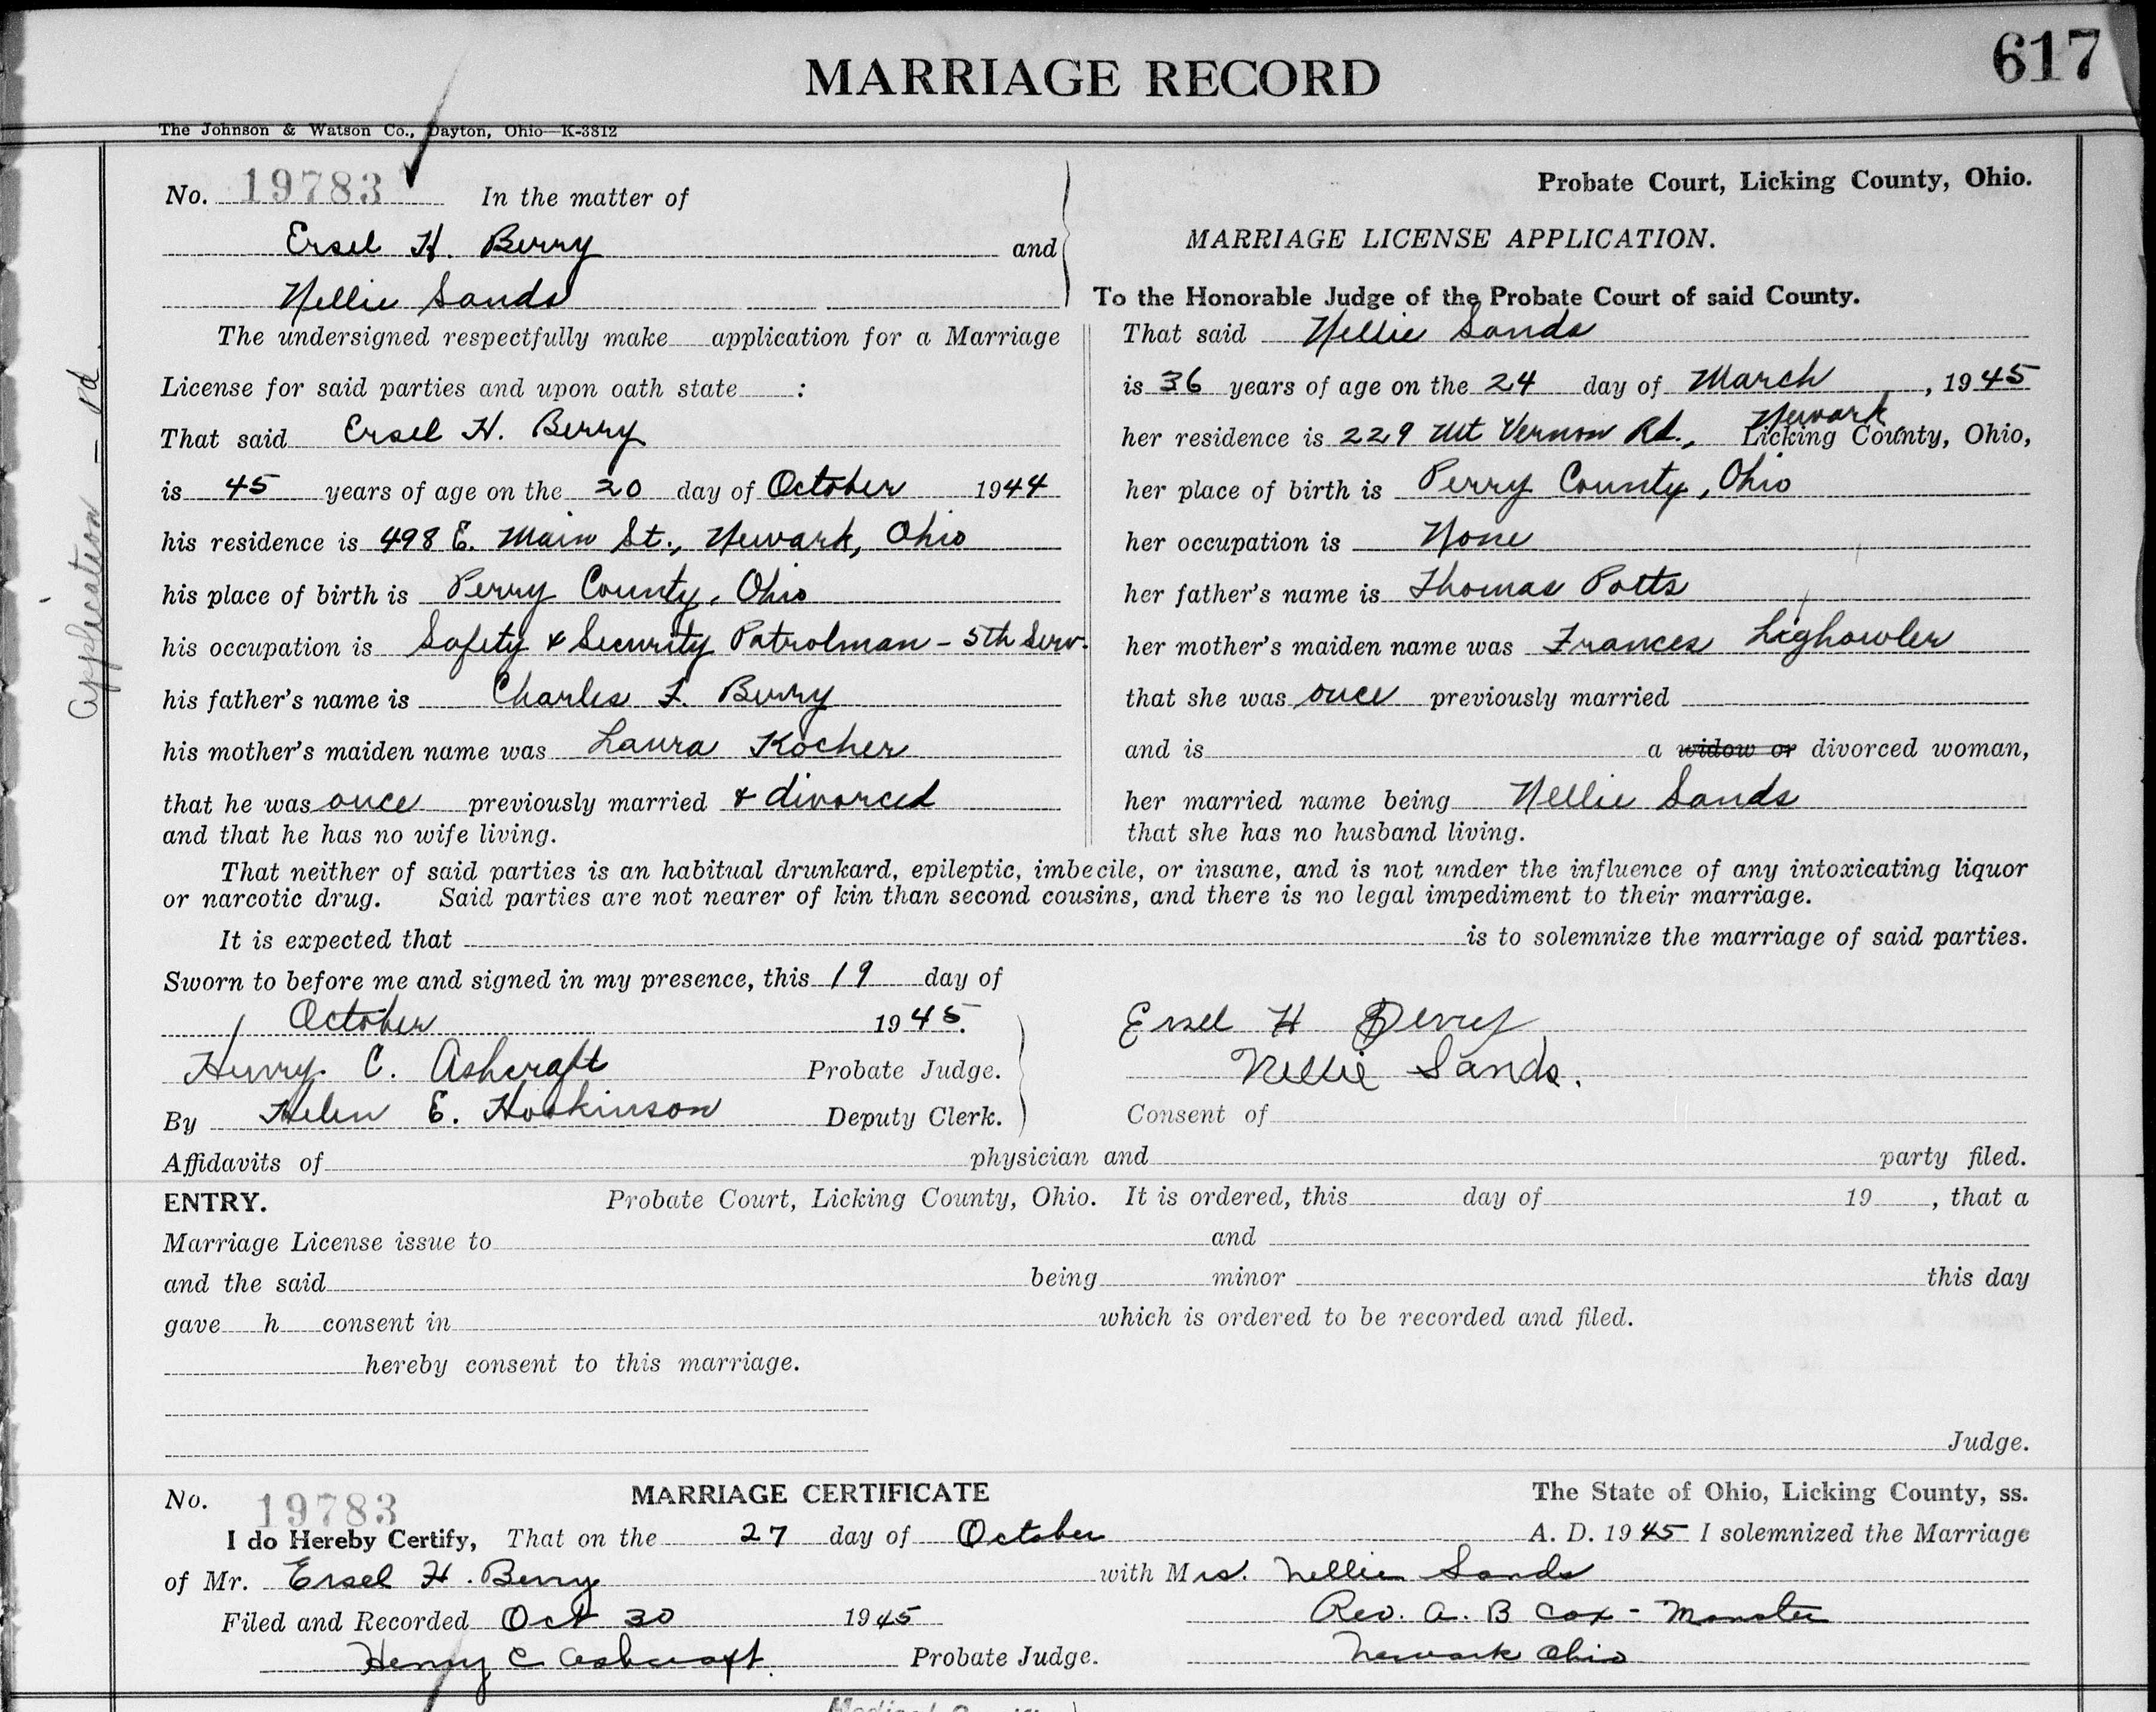 Ersel H. Berry to Nellie Sands' Marriage License.